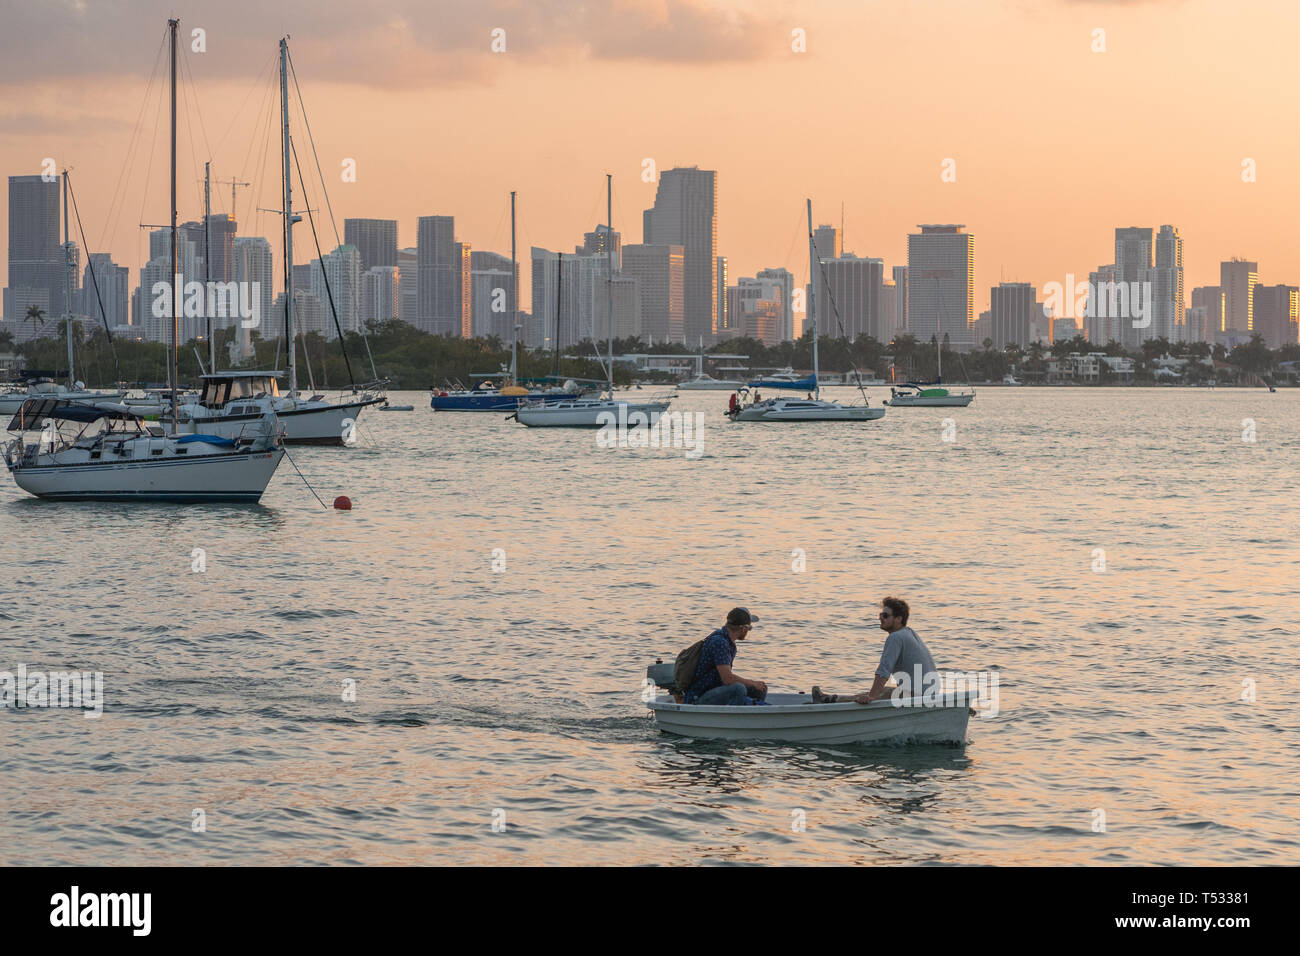 Two Men in a boat at Sunset across Miami from Biscayne Bay Path overlooking yachts and Downtown Miami Stock Photo